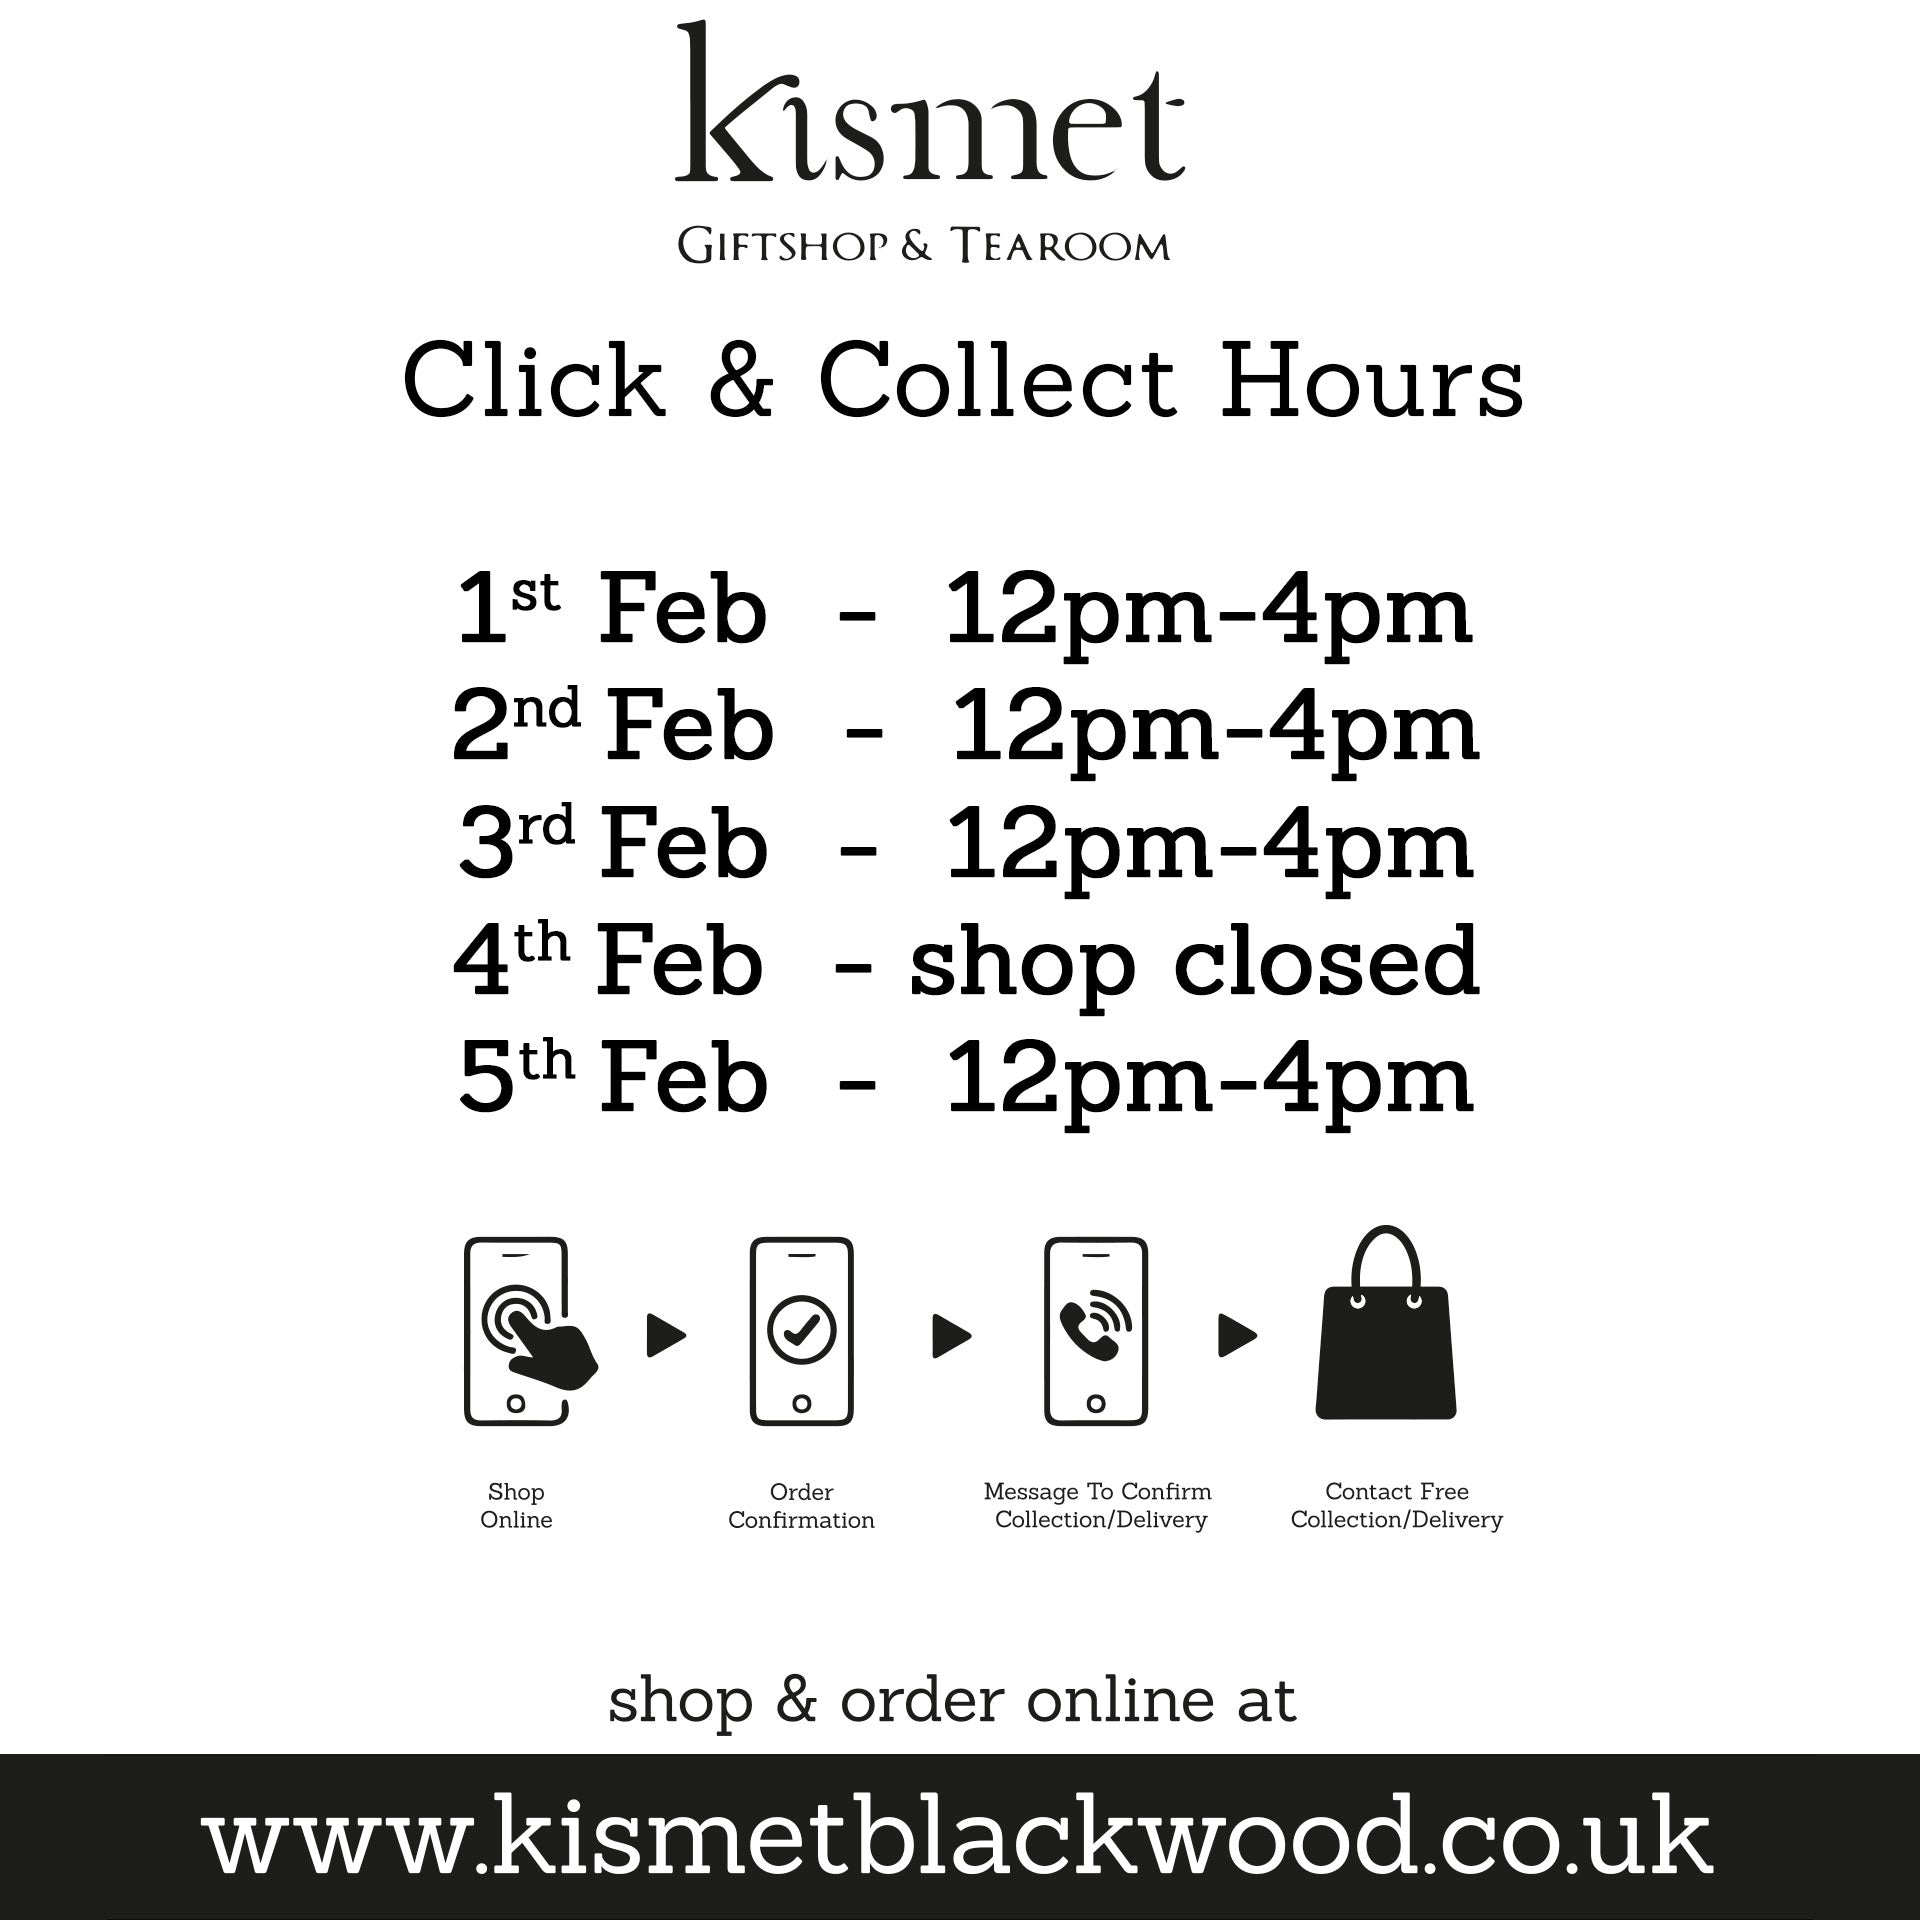 Click & Collect Hours 1st - 5th Feb